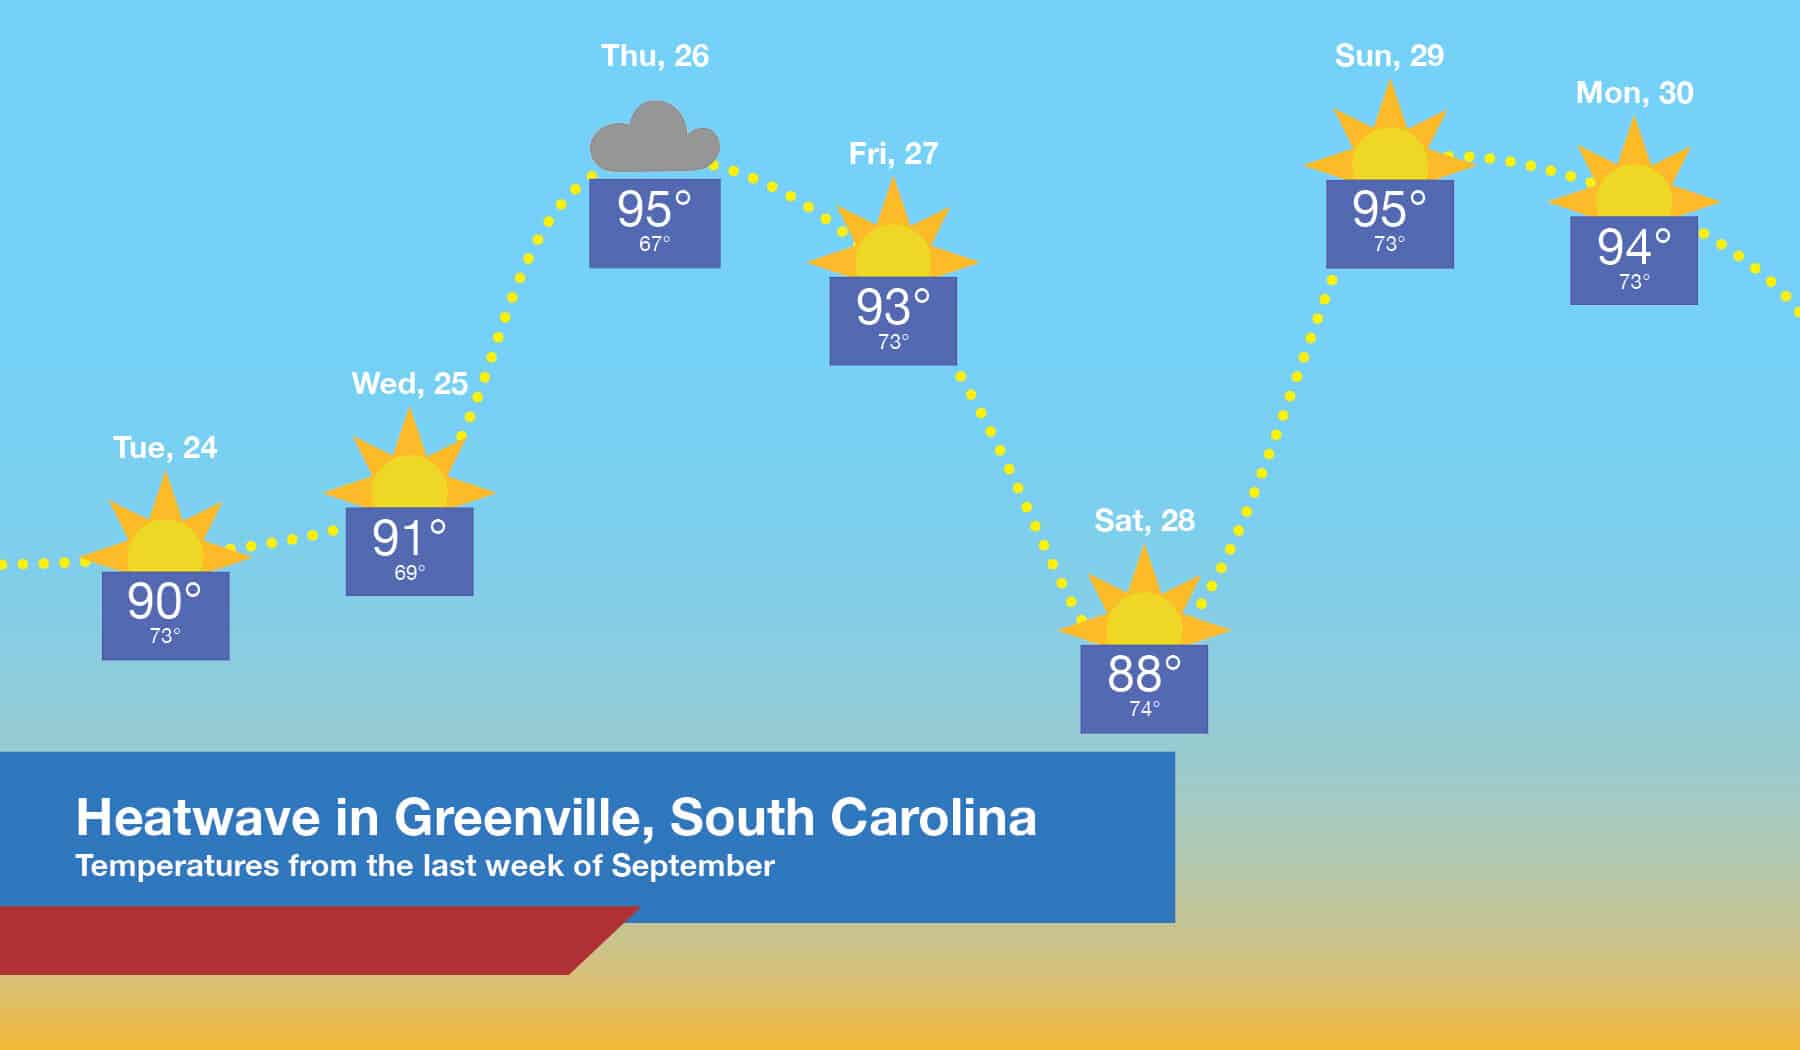 Even though its fall, Greenville, South Carolina recently experienced the hottest September in years.